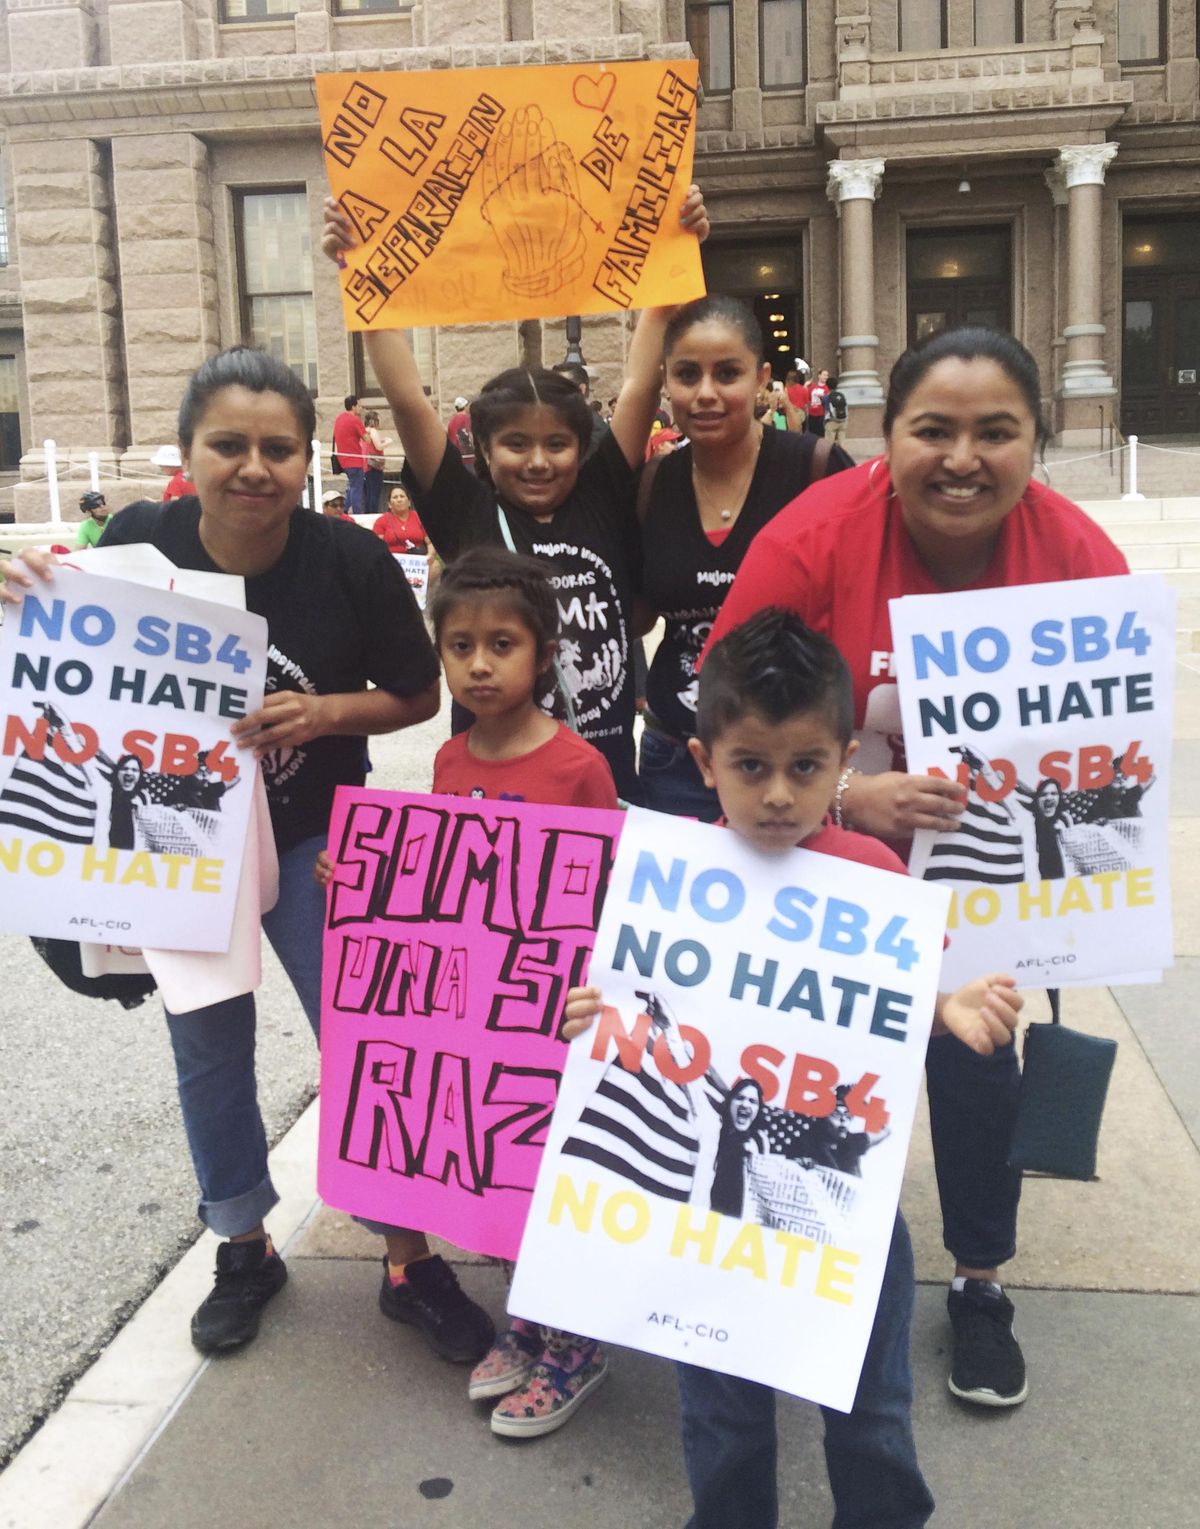 Rosario, right, and Marichuy, second from right in the back, demonstrate with family against a new Texas immigration law on Monday, May 29, 2017, in Austin, Texas. Opponents call Texas’ anti-sanctuary cities law a “show your papers” law since it empowers police to inquire about peoples’ immigration status during routine interactions such as traffic stops. (Meredith Hoffman / Associated Press)